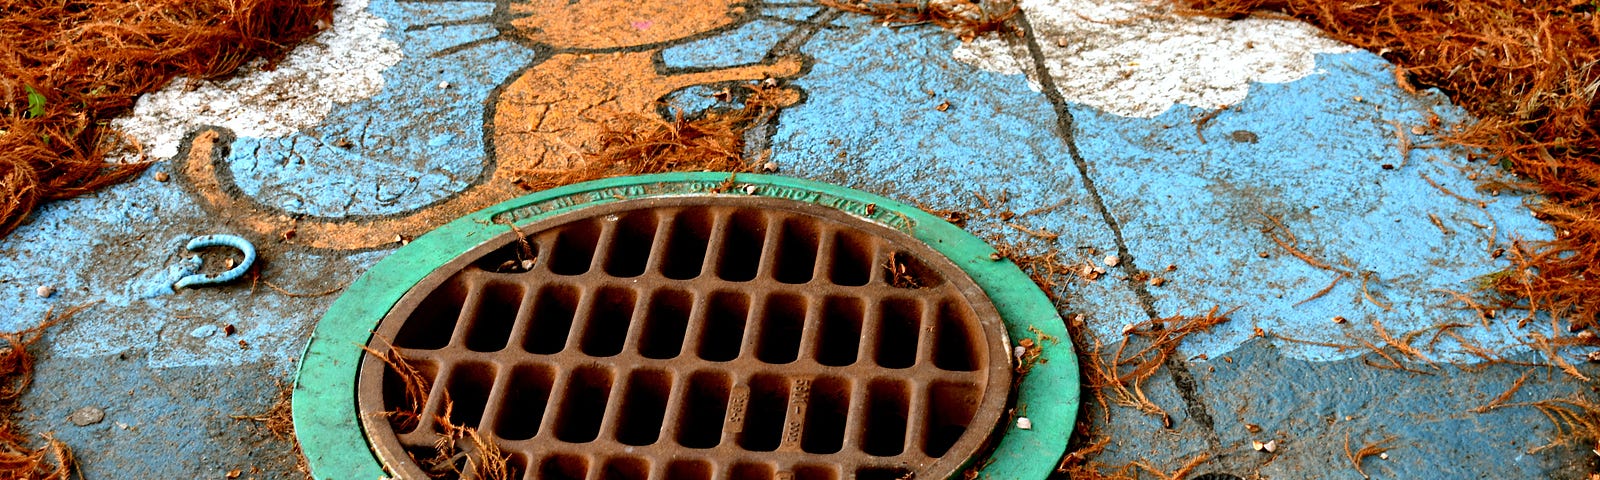 A rusty grate over a drainage inlet is surrounded by concrete, on which is painted a cartoon orange cat fishing with a pole, with red fishes ready to bite.